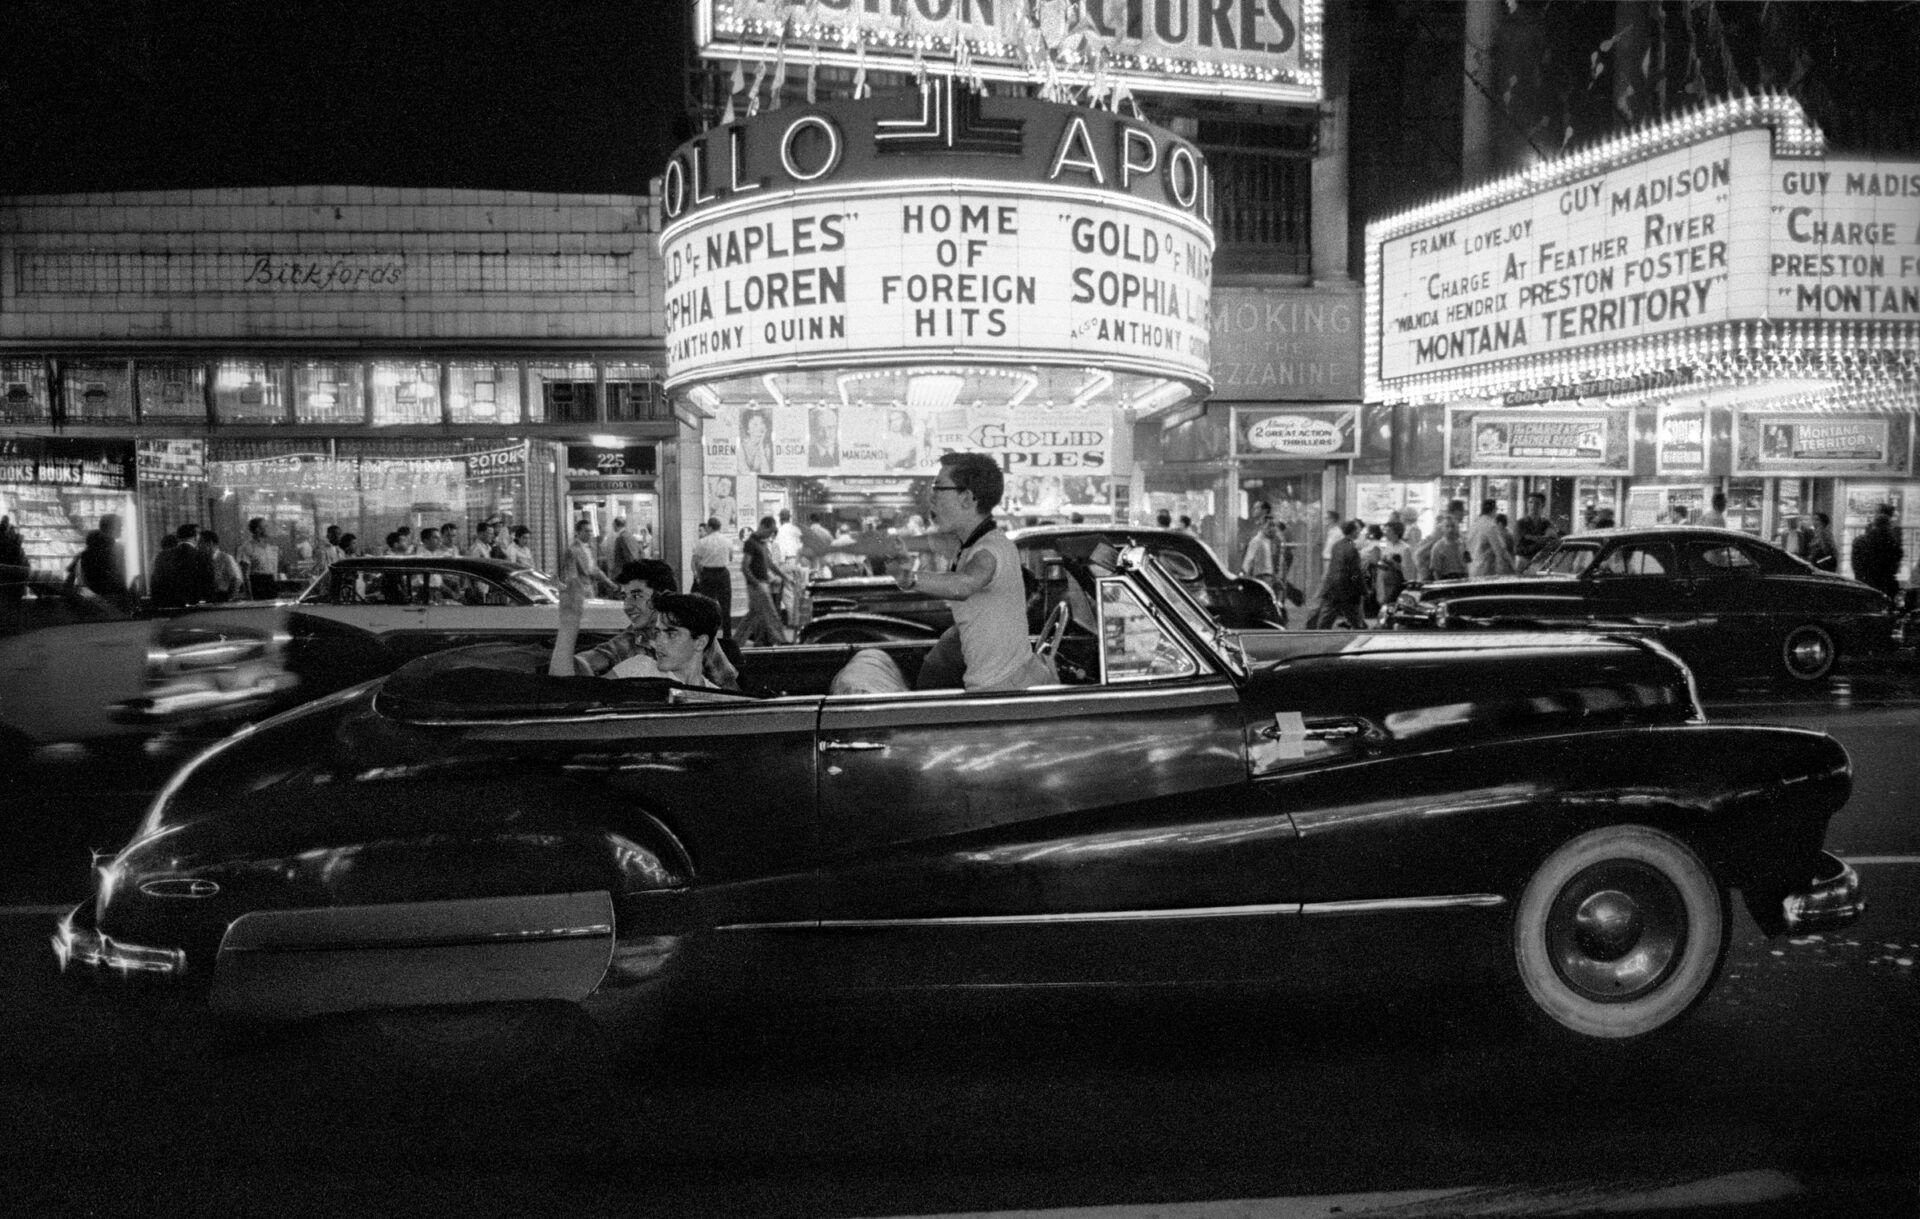 Teenagers cruising in a convertible through Times Square at night in New York City in 1957. The Apollo Theater marquee is in the background.